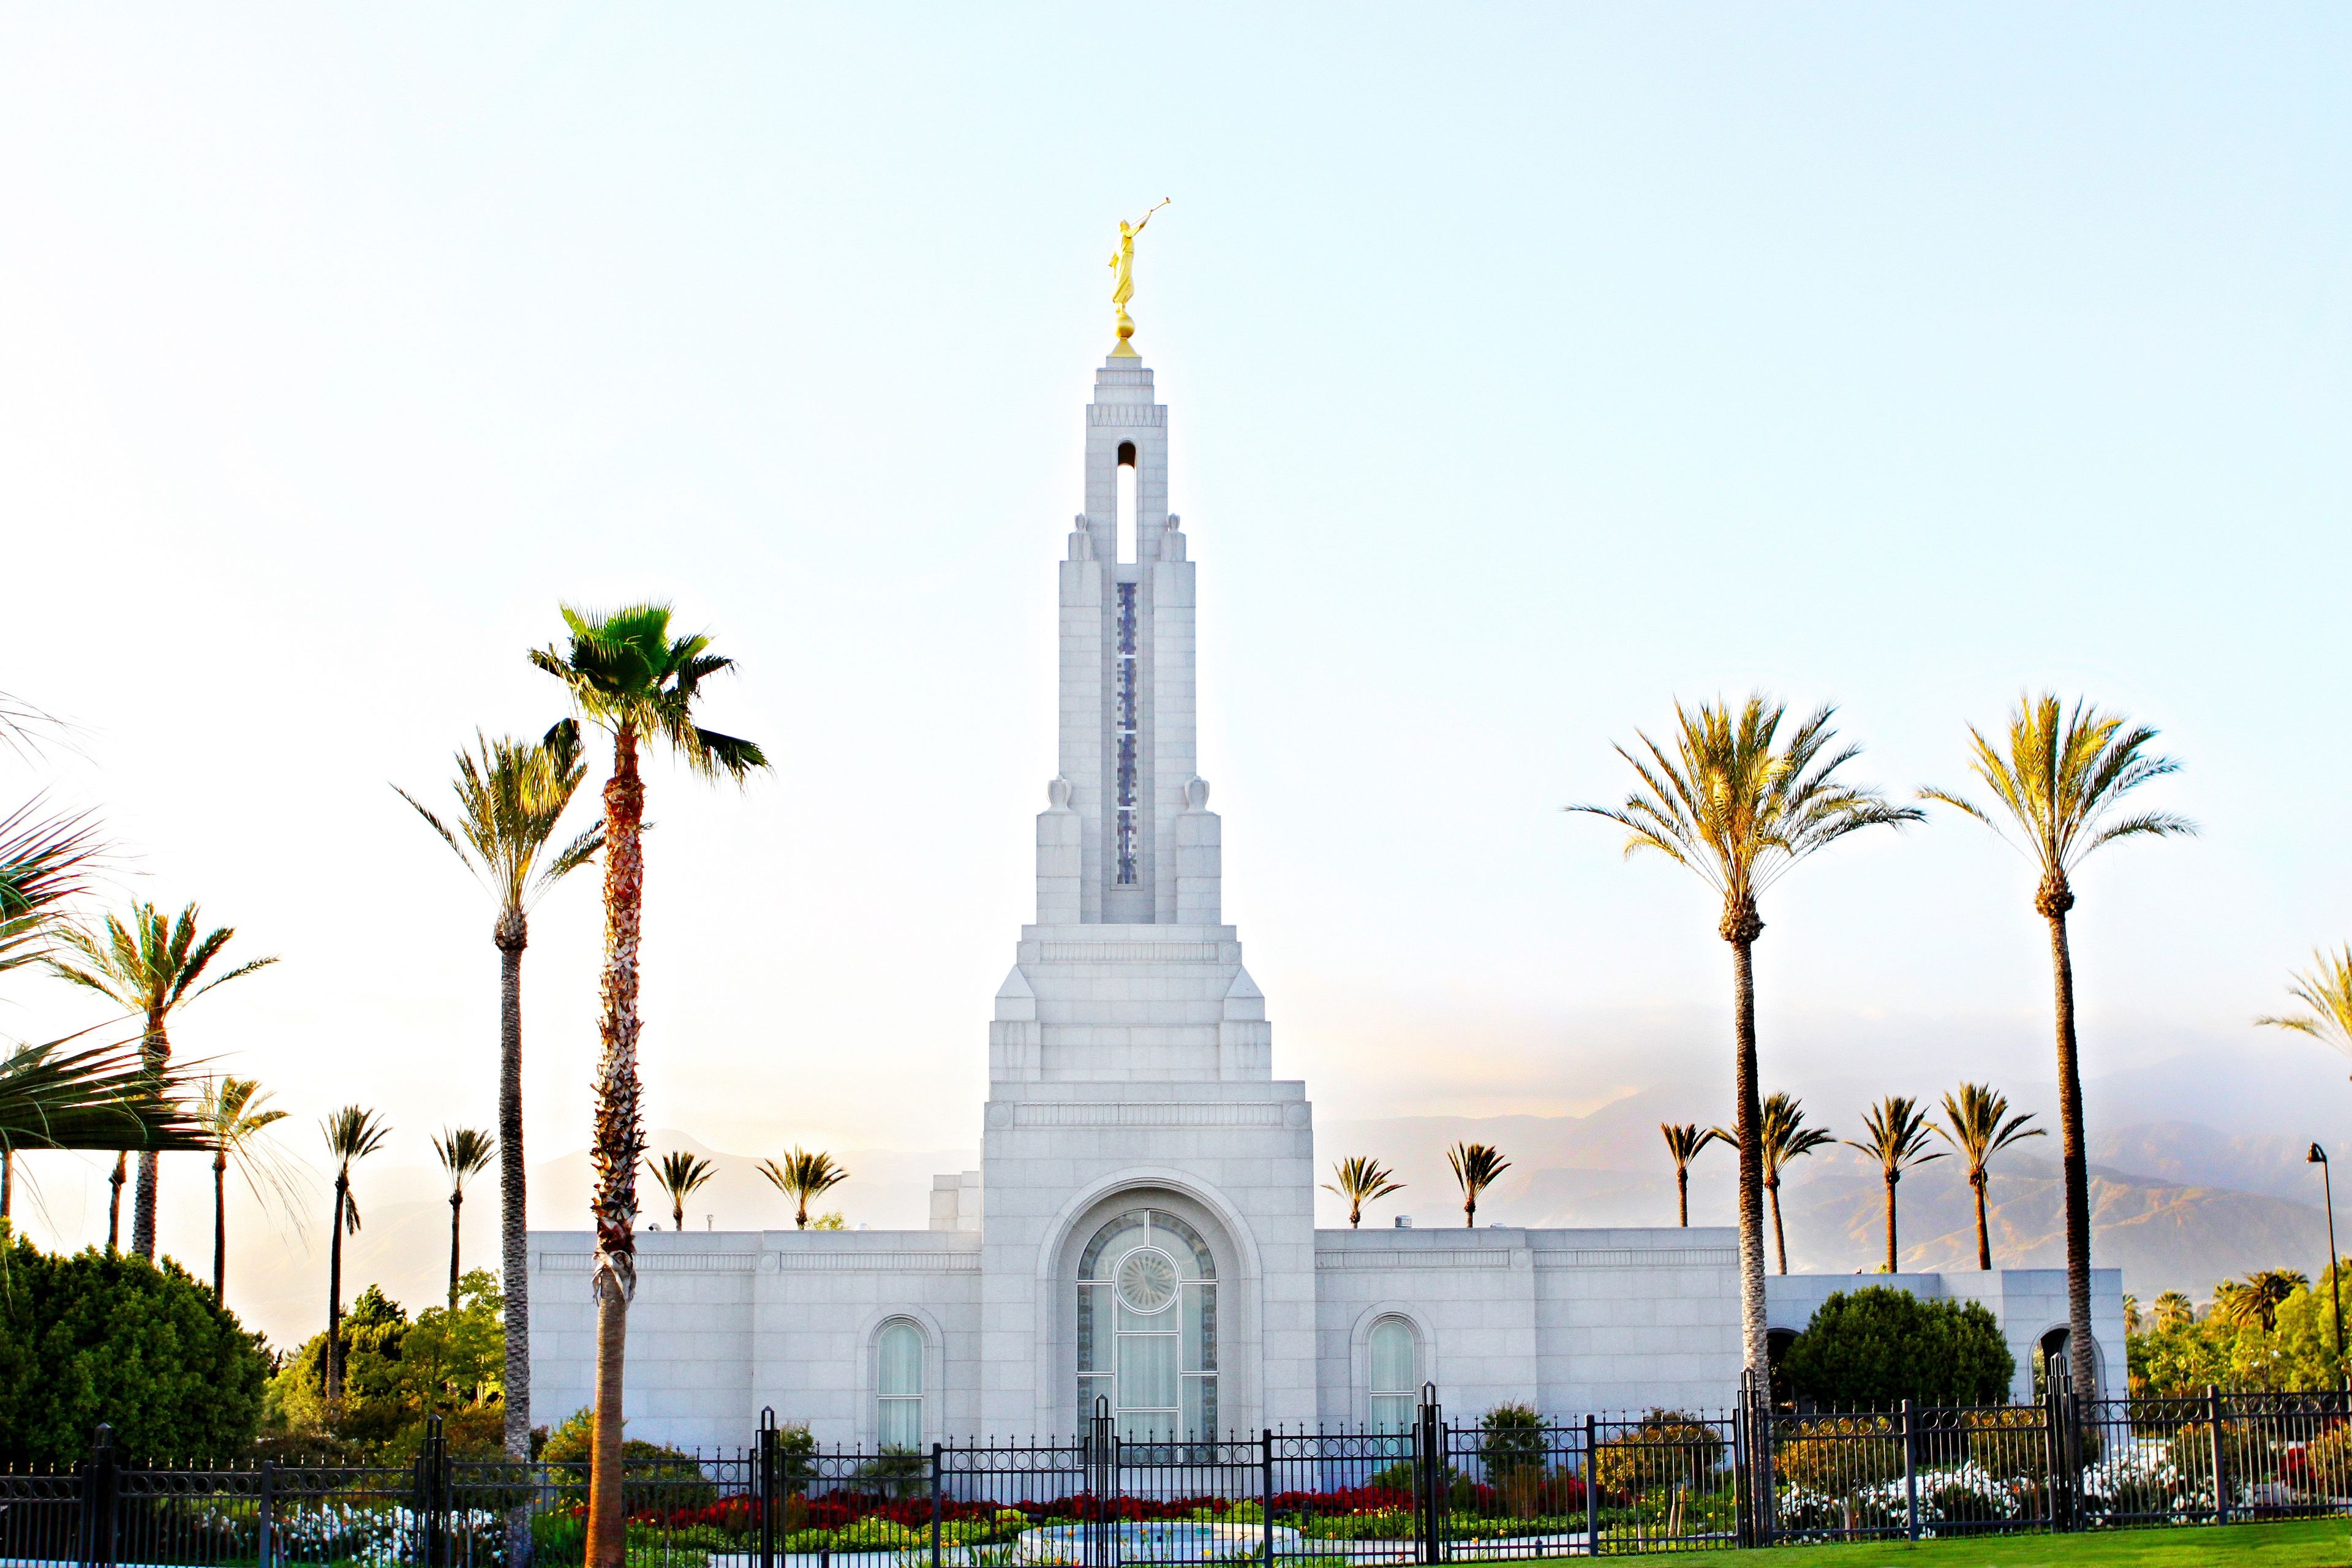 The Redlands California Temple, with palm trees growing all around it.